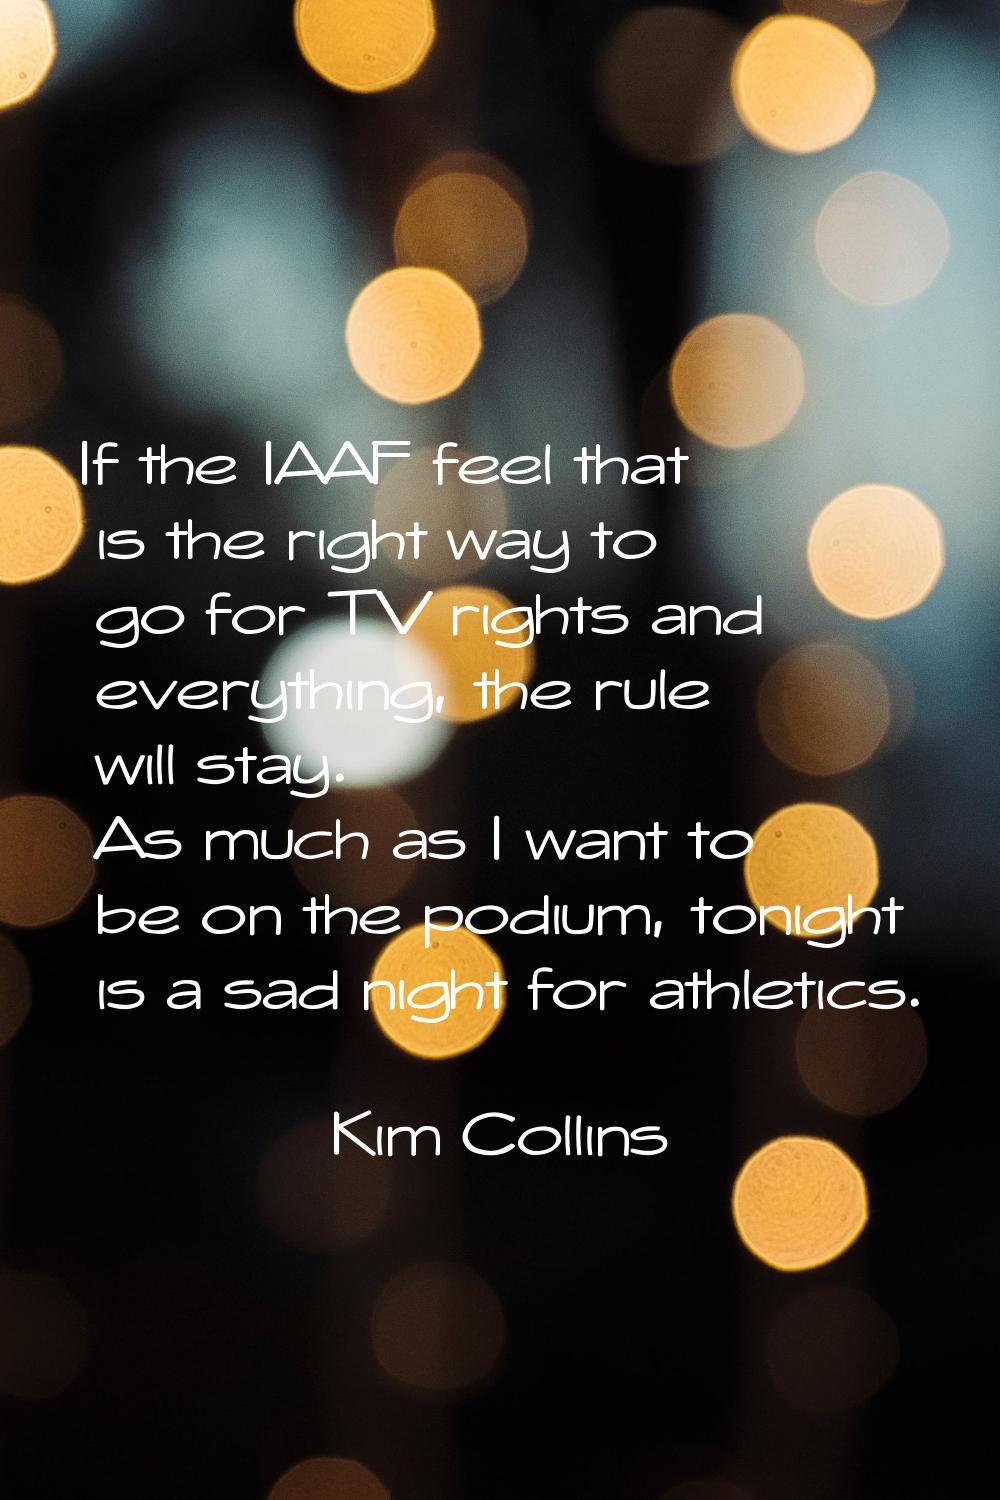 If the IAAF feel that is the right way to go for TV rights and everything, the rule will stay. As m